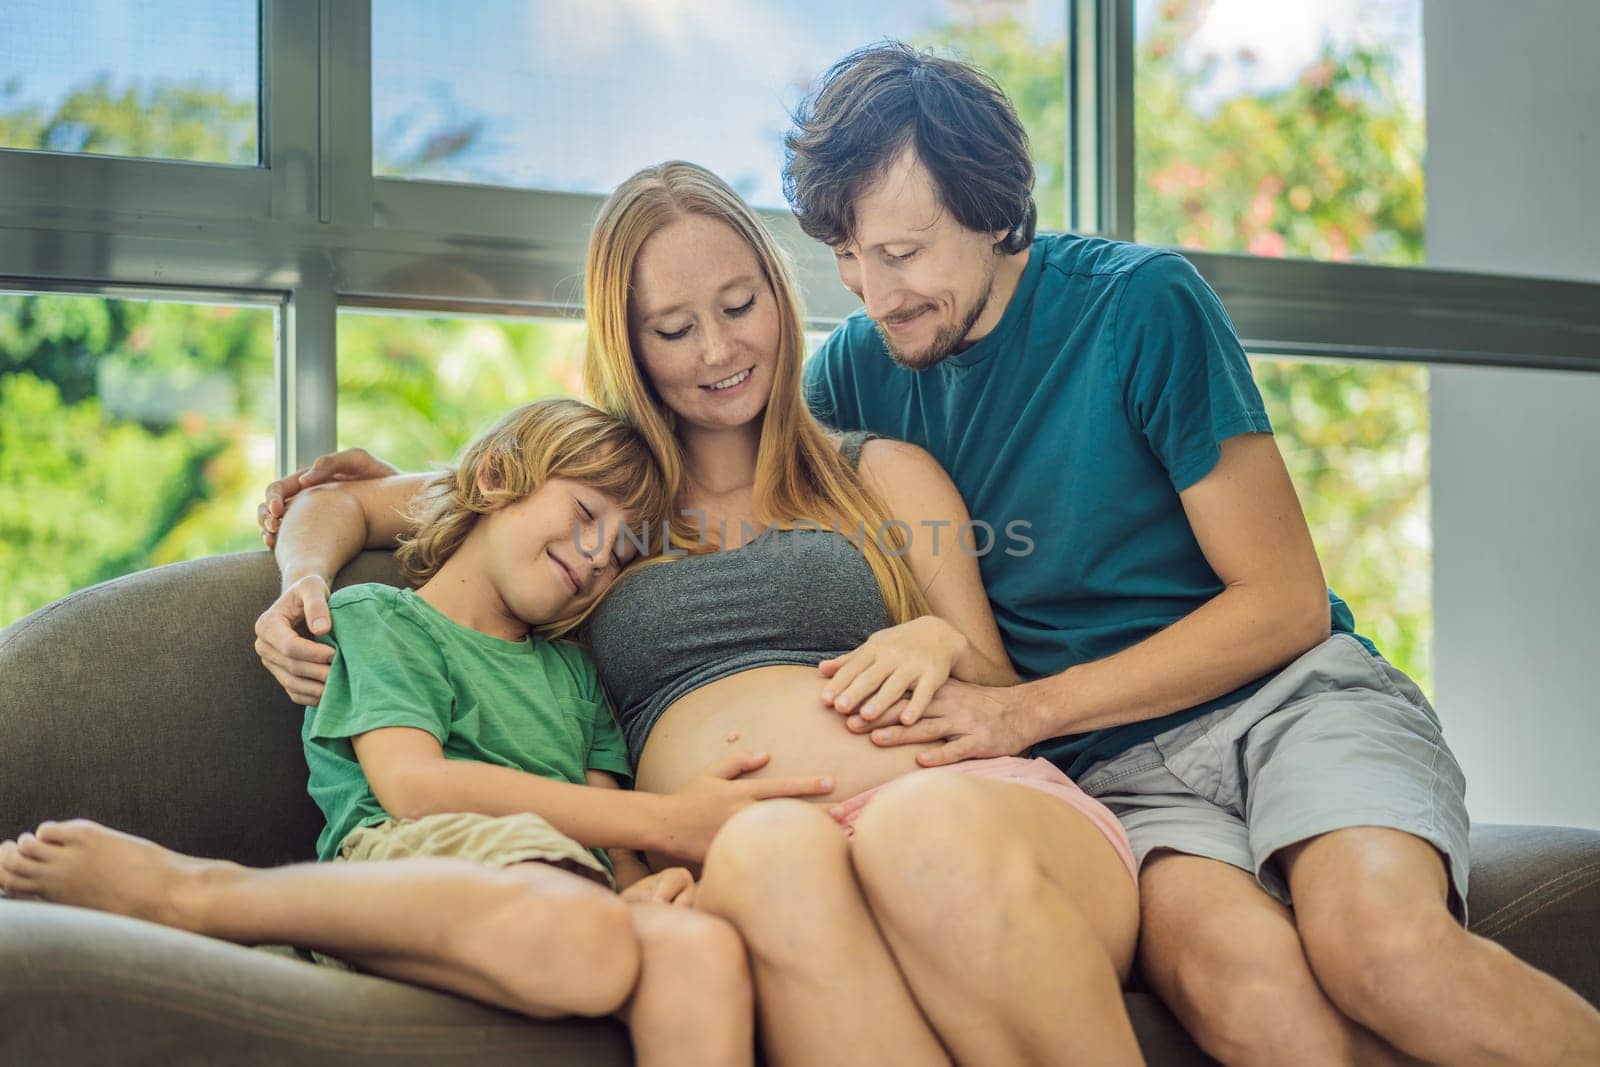 Expectant parents, mom, dad, and their eldest son share a heartwarming moment on the sofa, discussing the exciting journey of pregnancy.